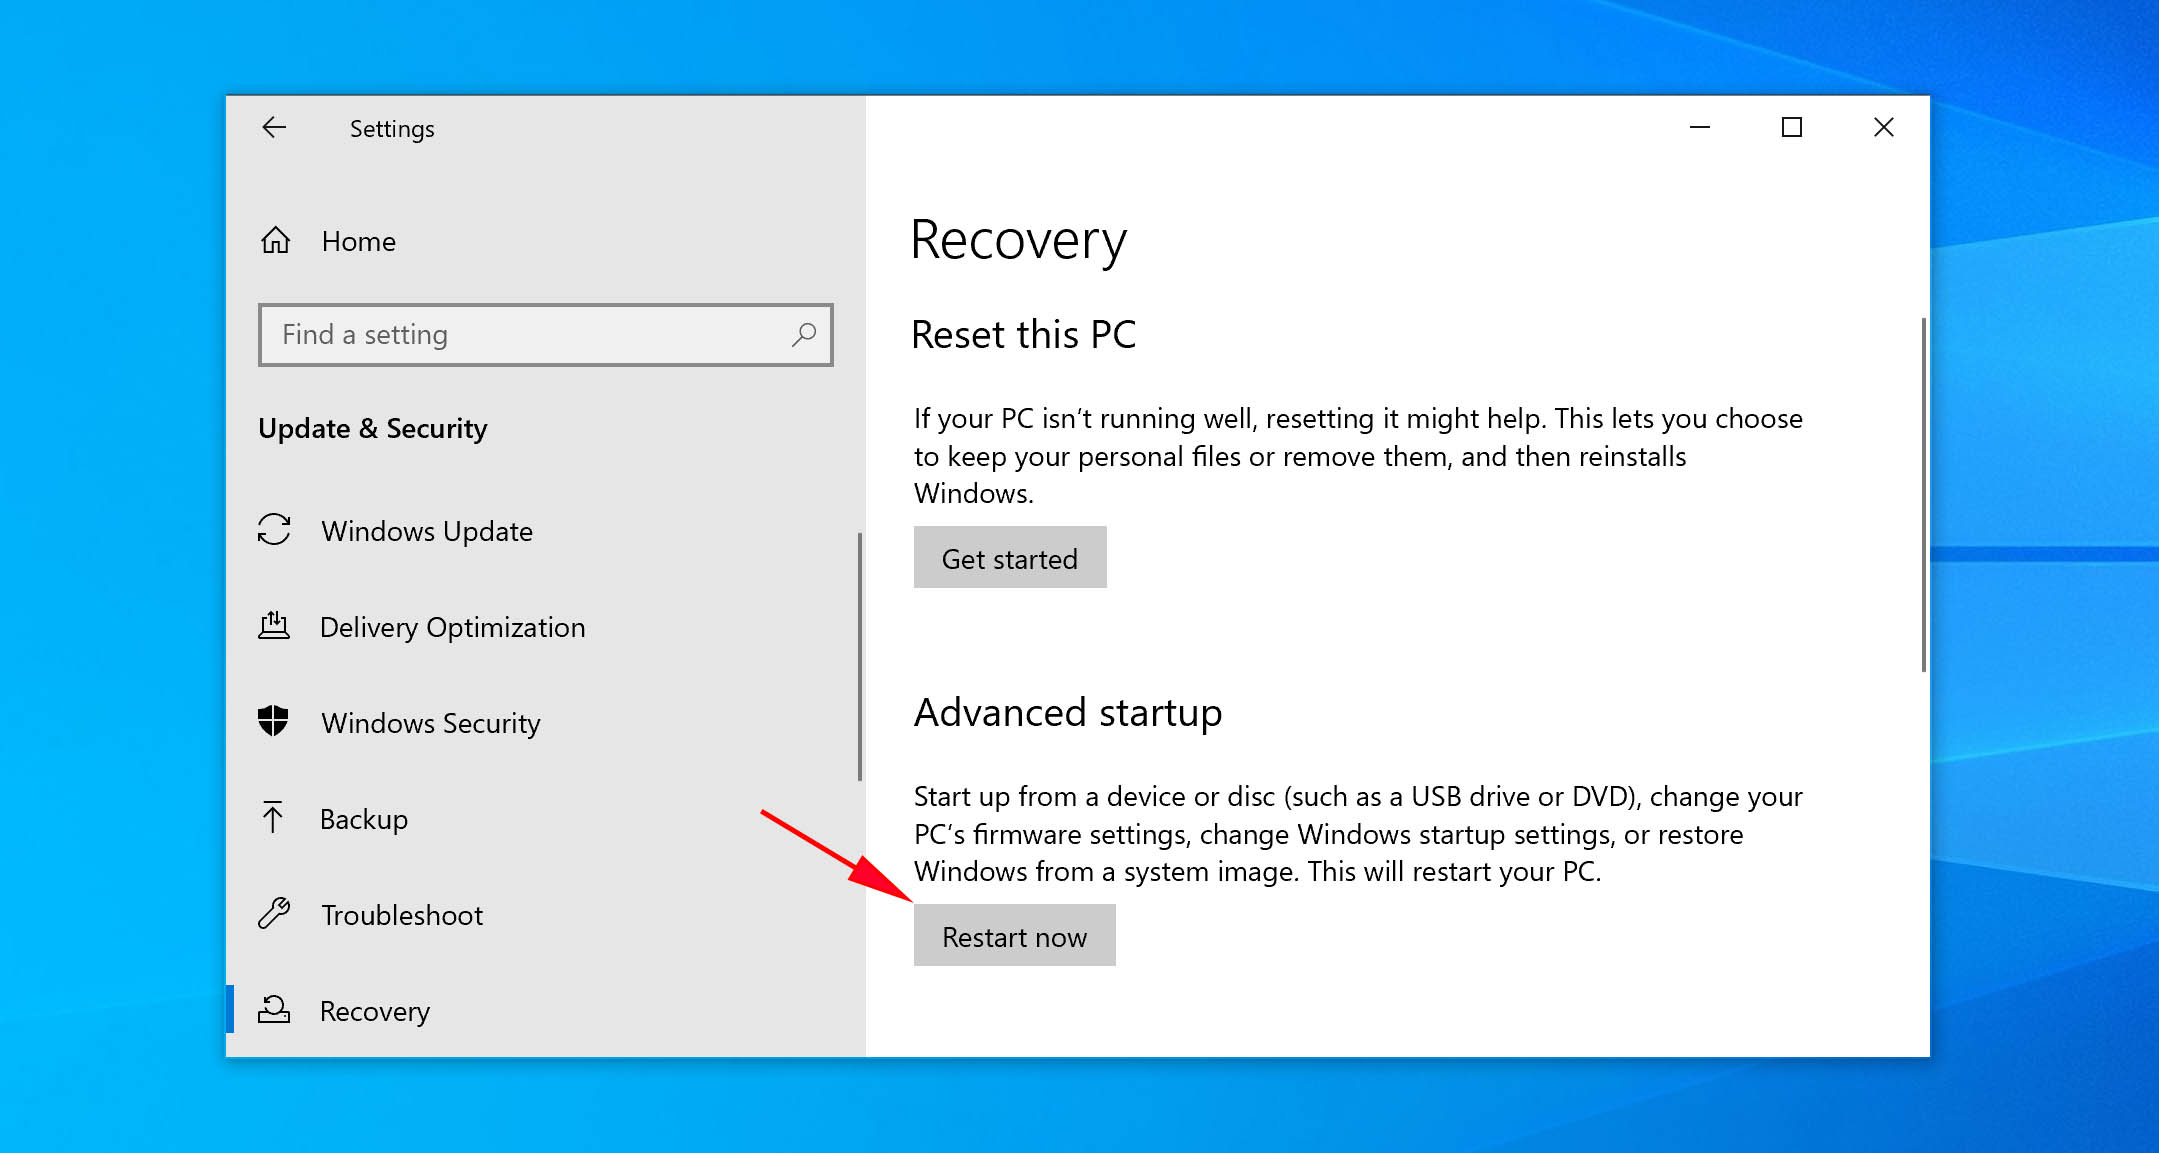 Reboot your PC into Advanced Startup